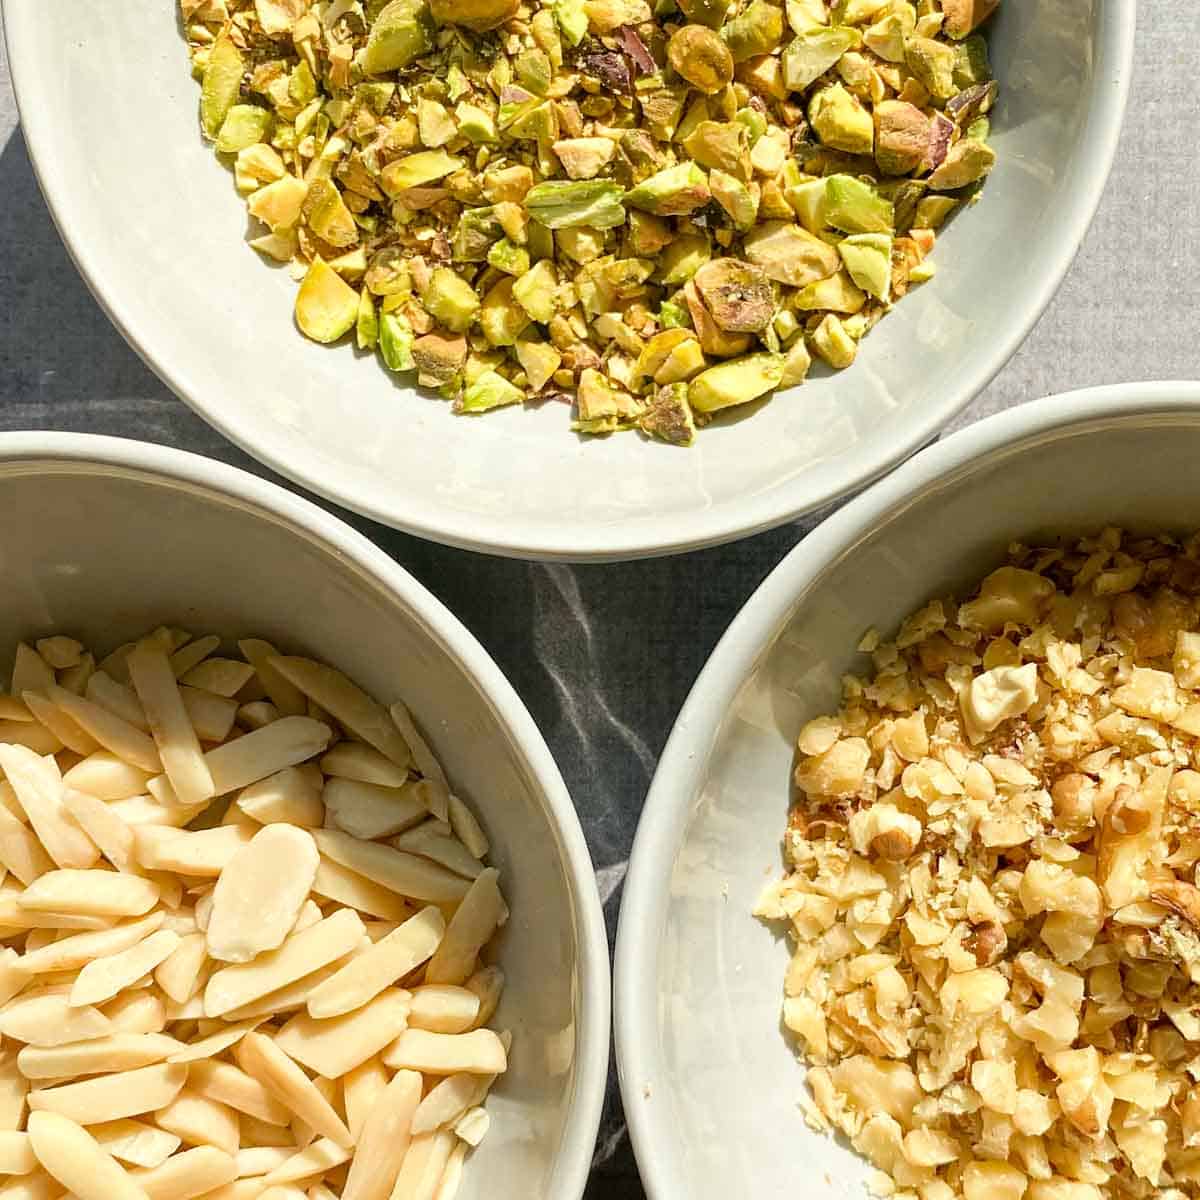 Bowls of pistachios, slivered almonds, and chopped walnuts